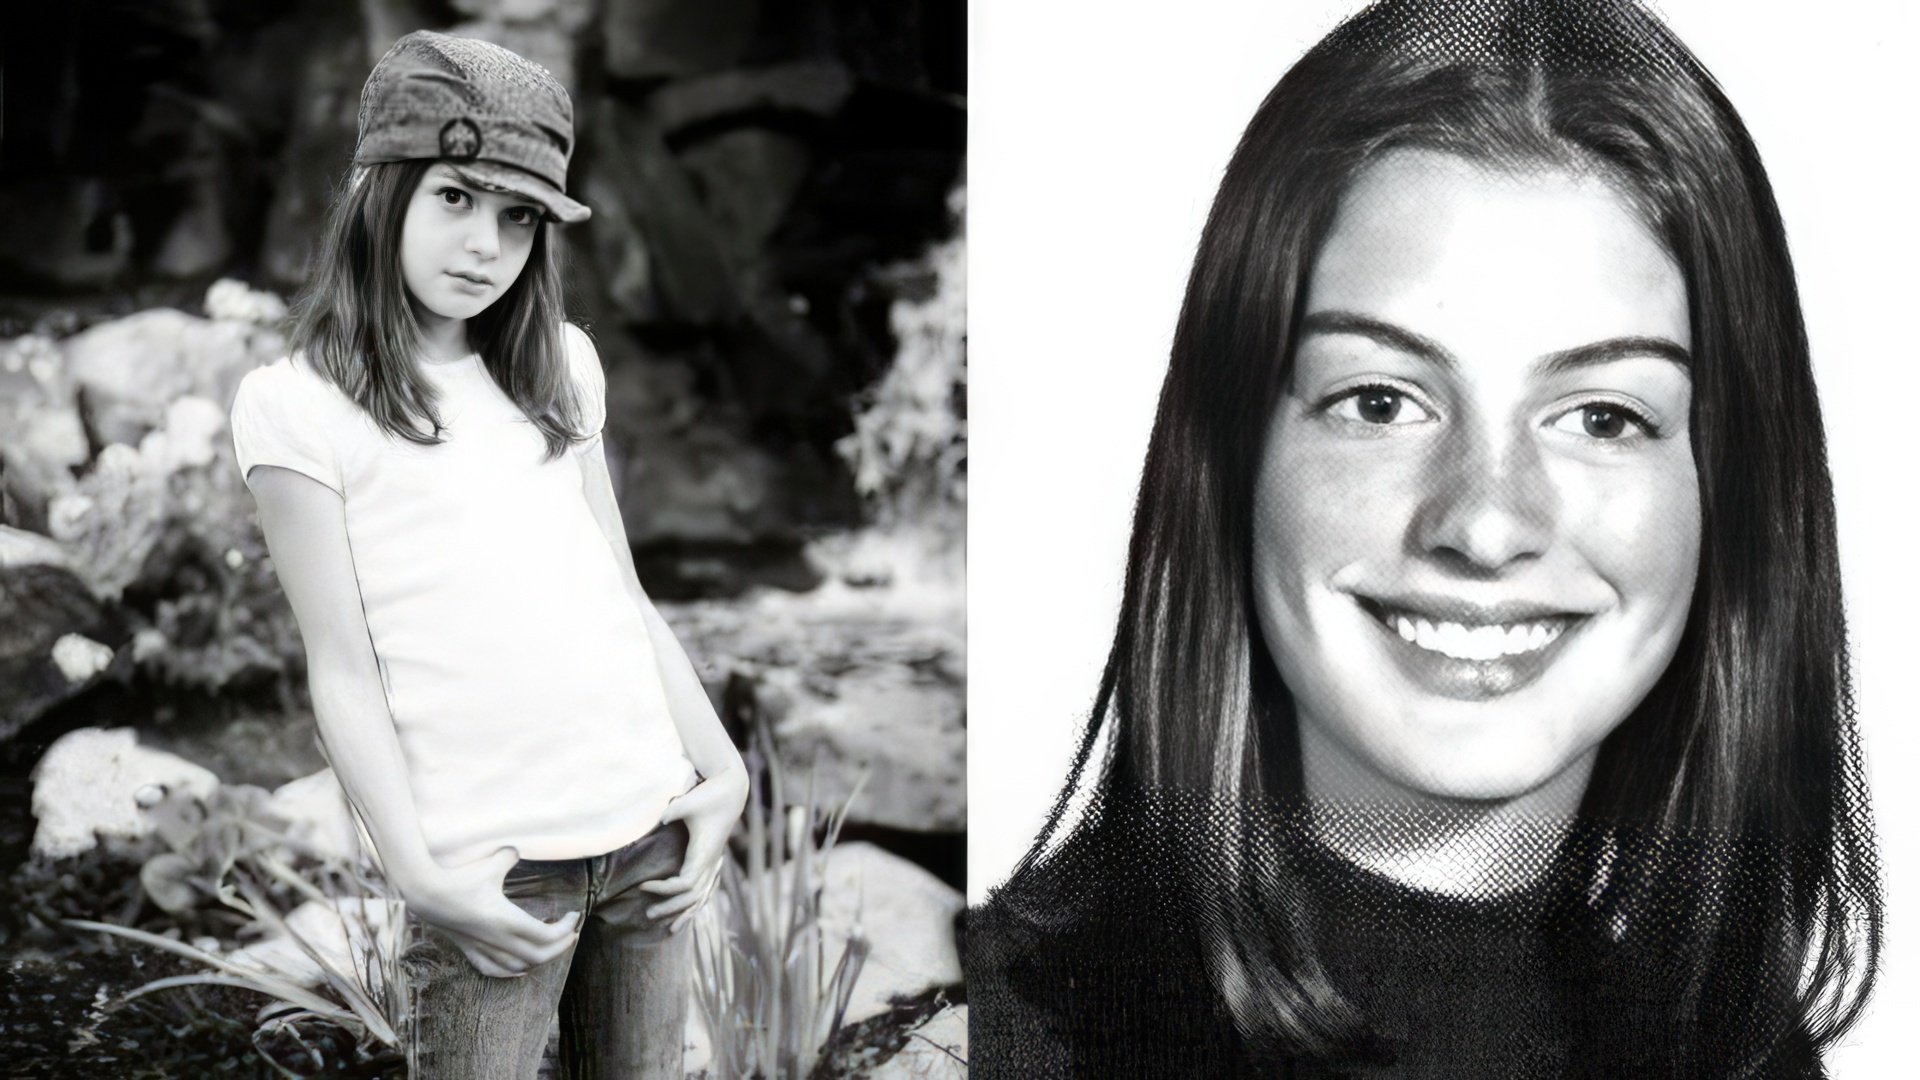 Anne Hathaway in childhood and youth